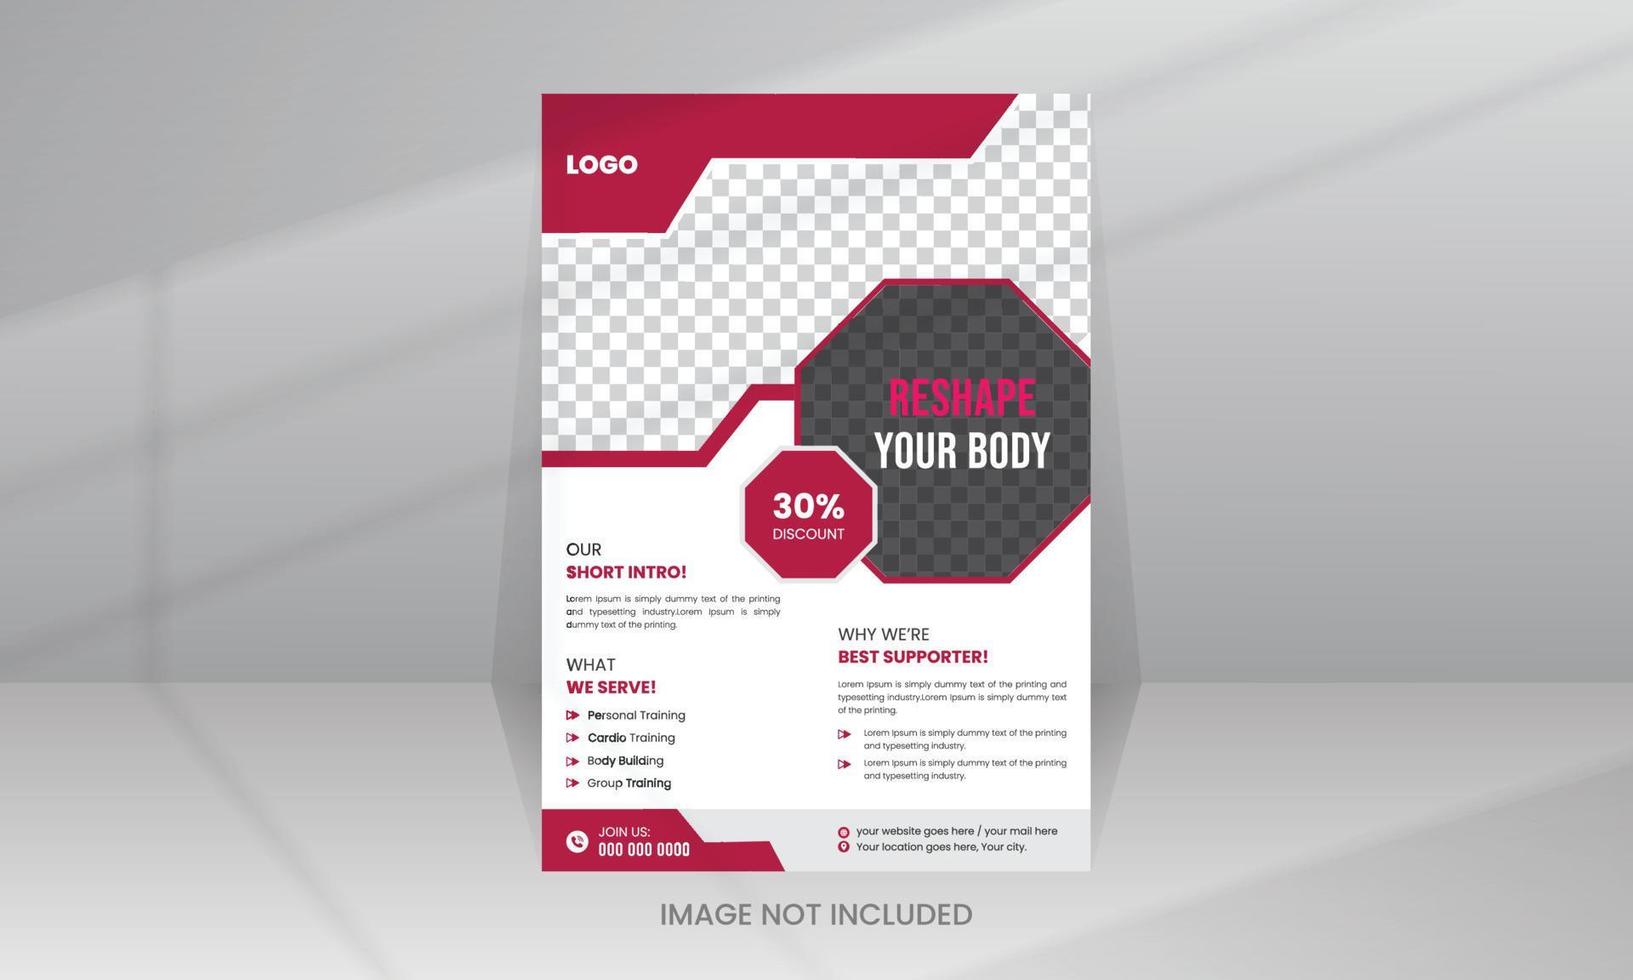 Reshape body Fitness Club Gym Flyer template vector